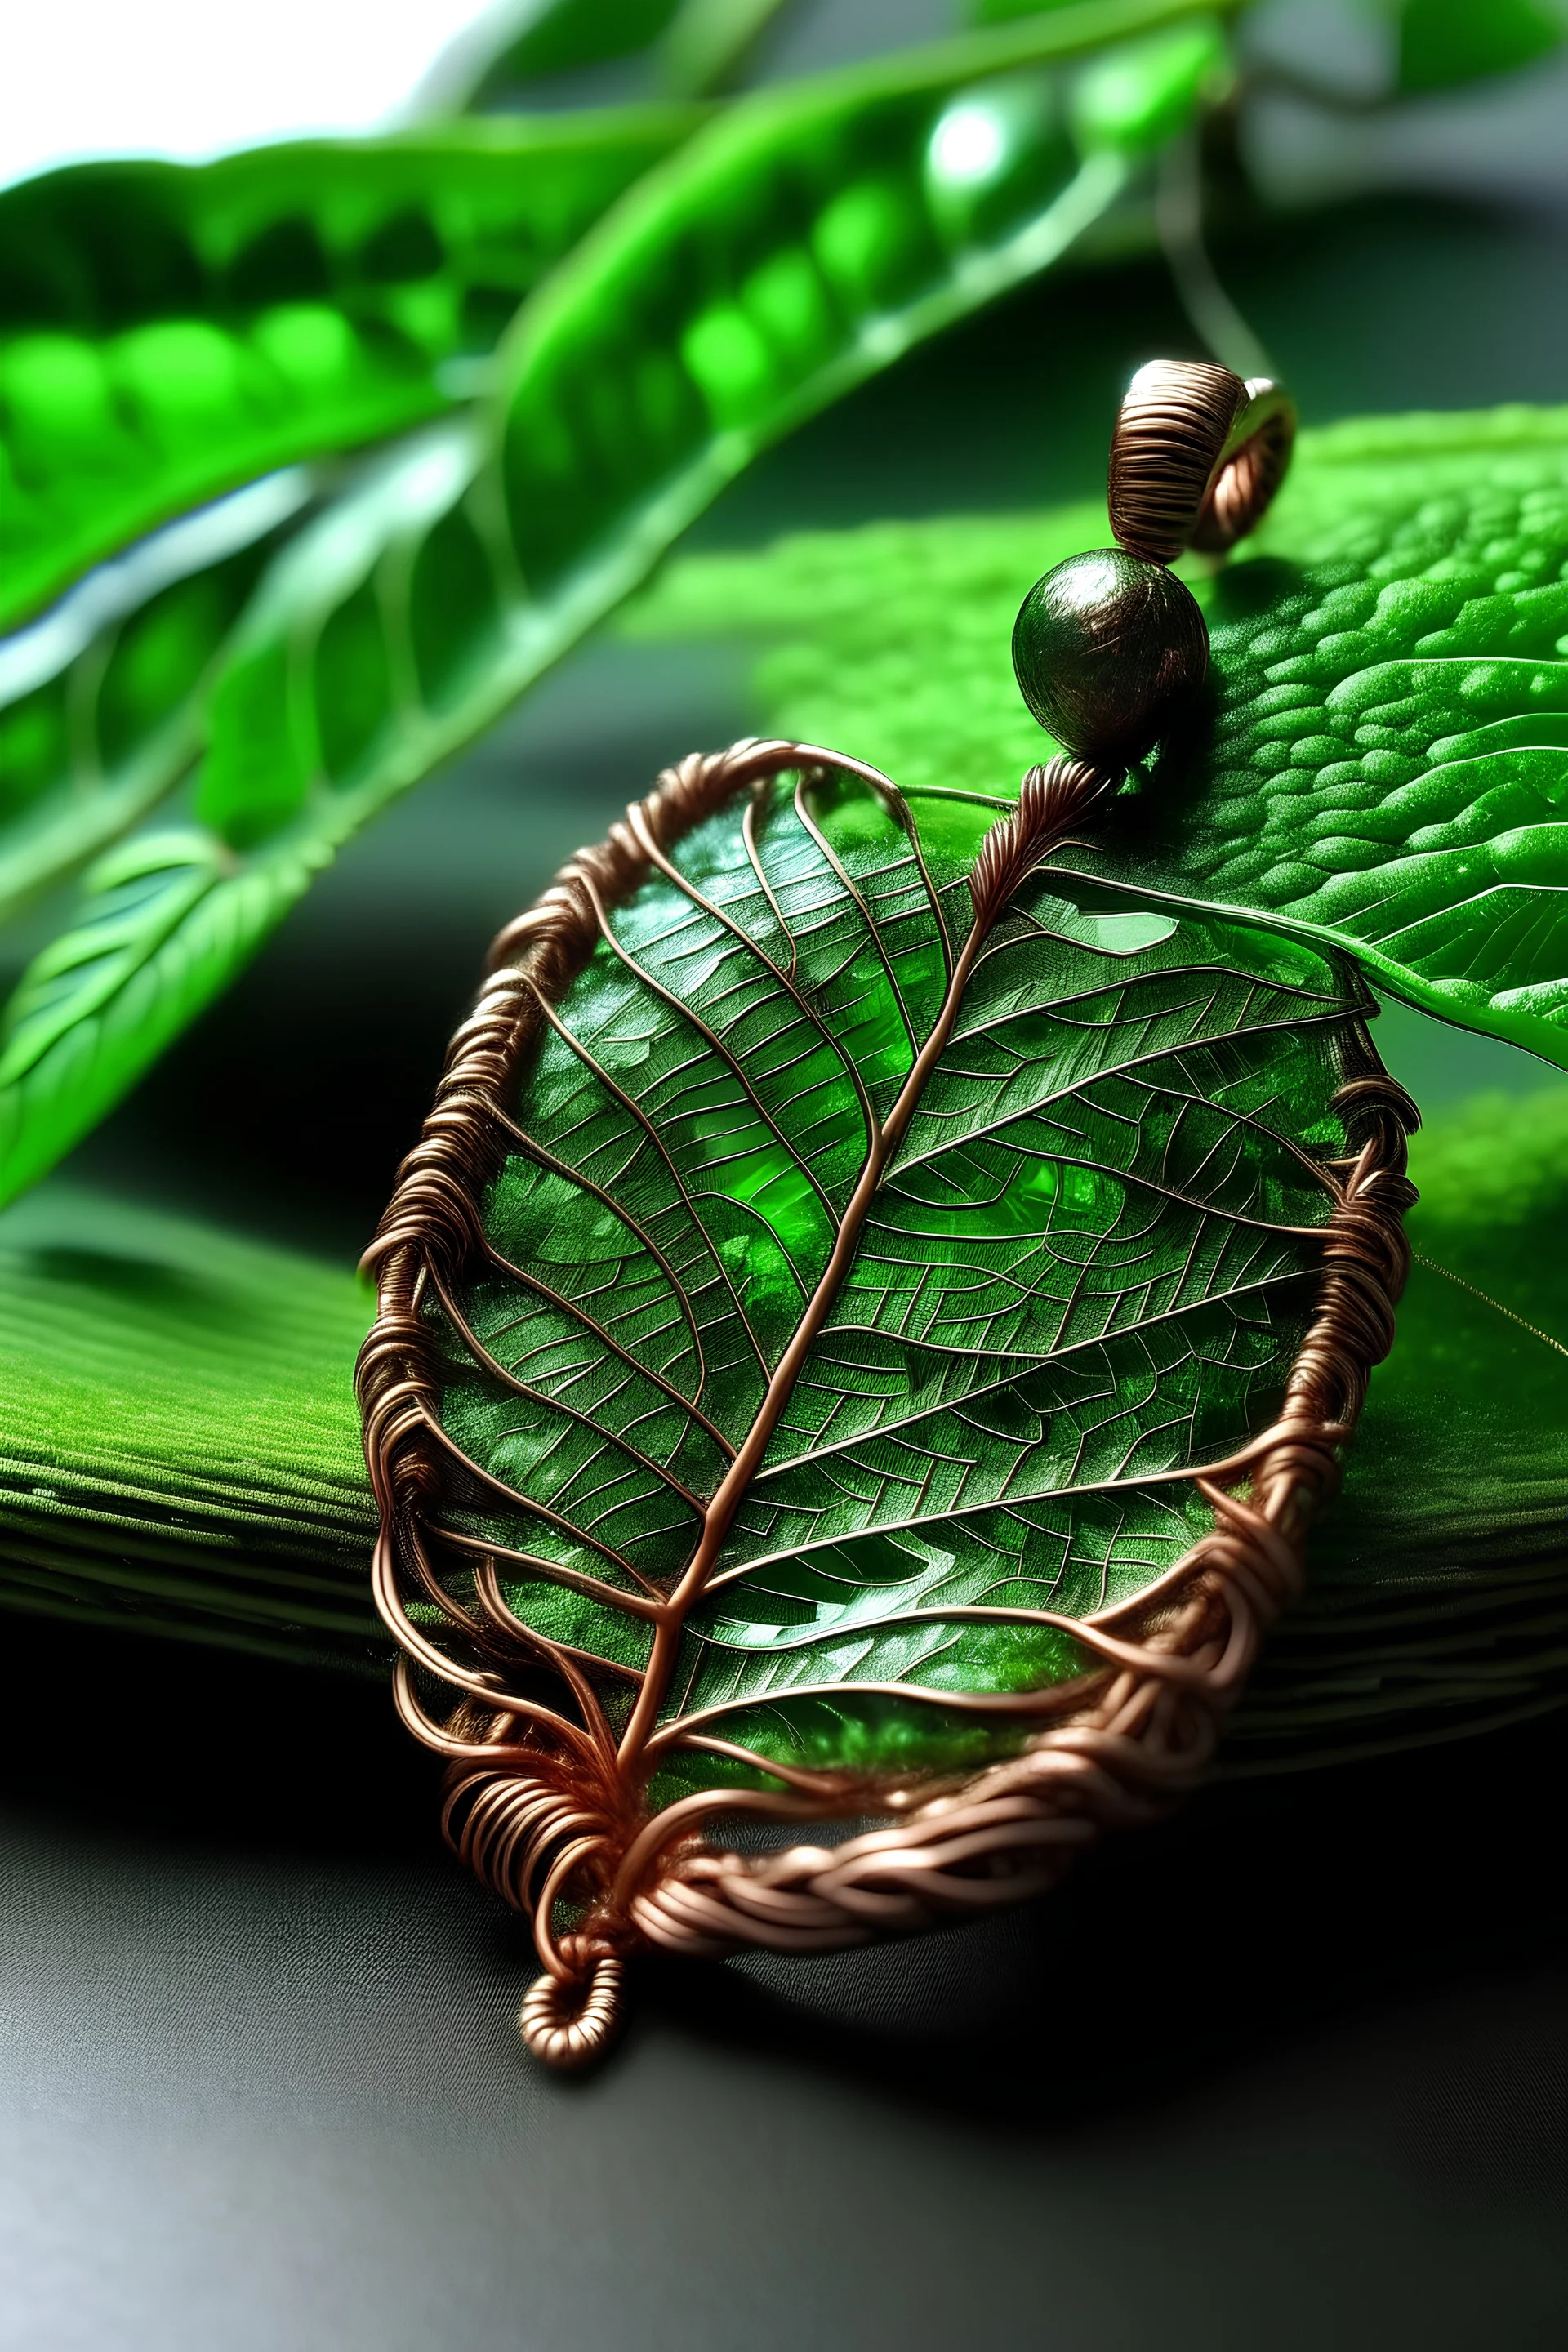 Imagine a delicate copper necklace featuring a real, pressed fern frond electroformed with a vibrant green crystal at its center. The intricate veins of the fern are highlighted by the copper, creating a beautiful contrast against the emerald glow of the crystal. This piece embodies the essence of a sunlit forest, capturing the delicate beauty of nature in a wearable work of art.